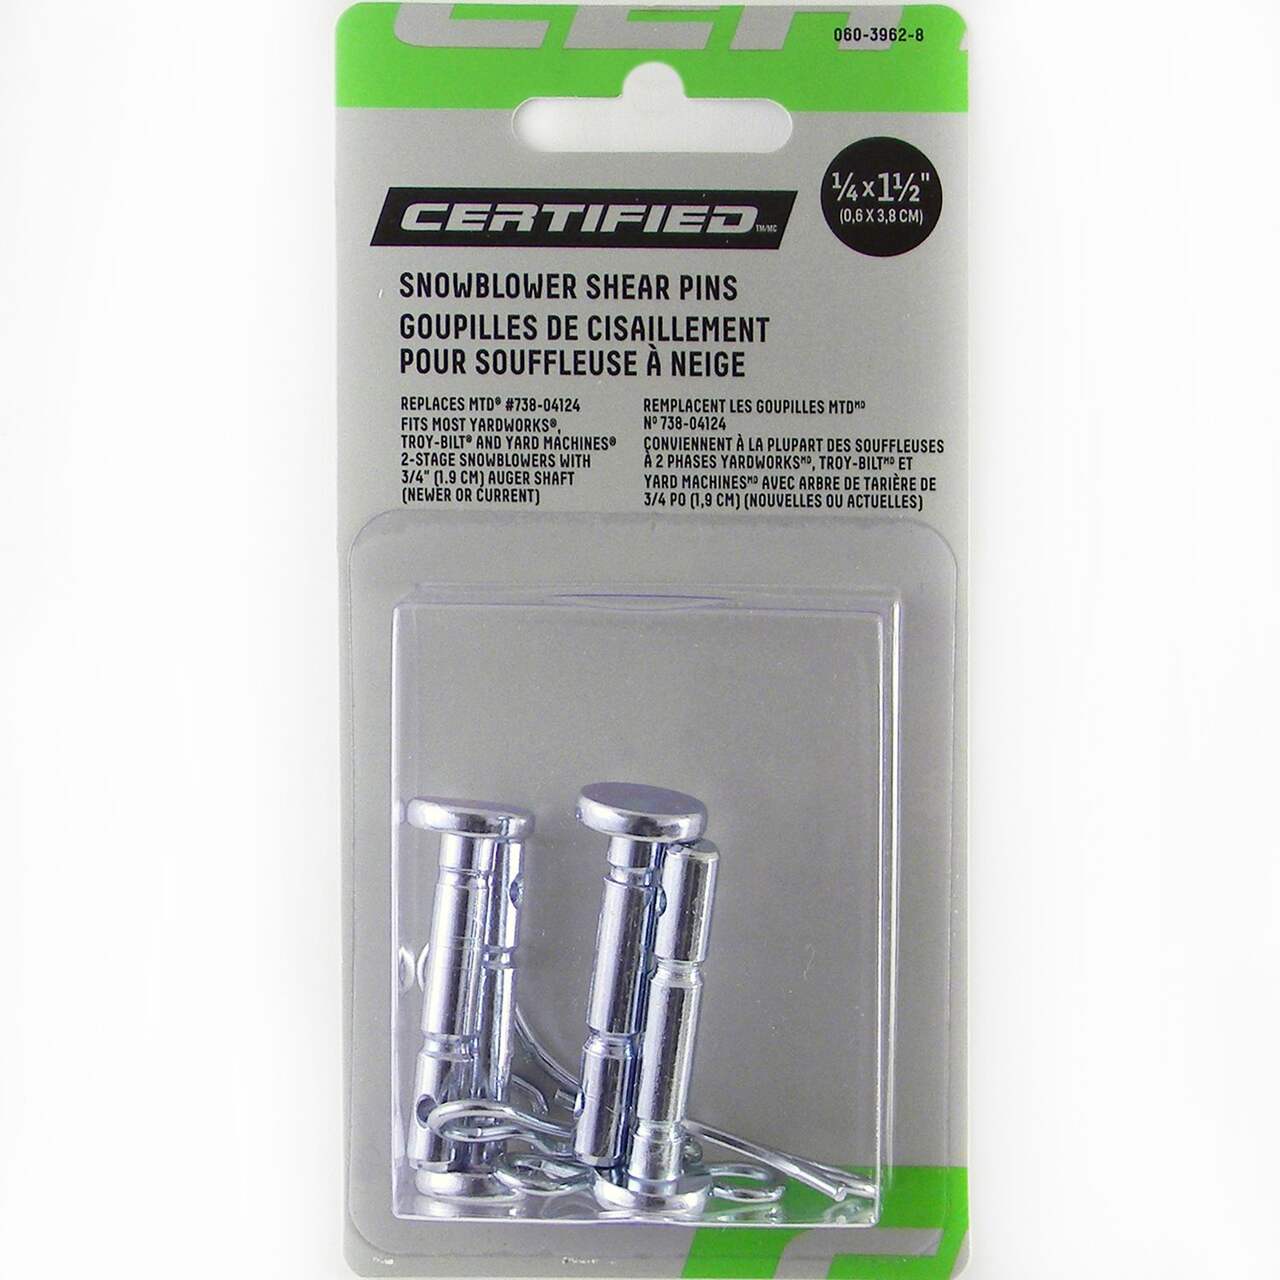 Certified Replacement Shear Pins, Incl. Cotter Pins, 1/4 x 1.5-in